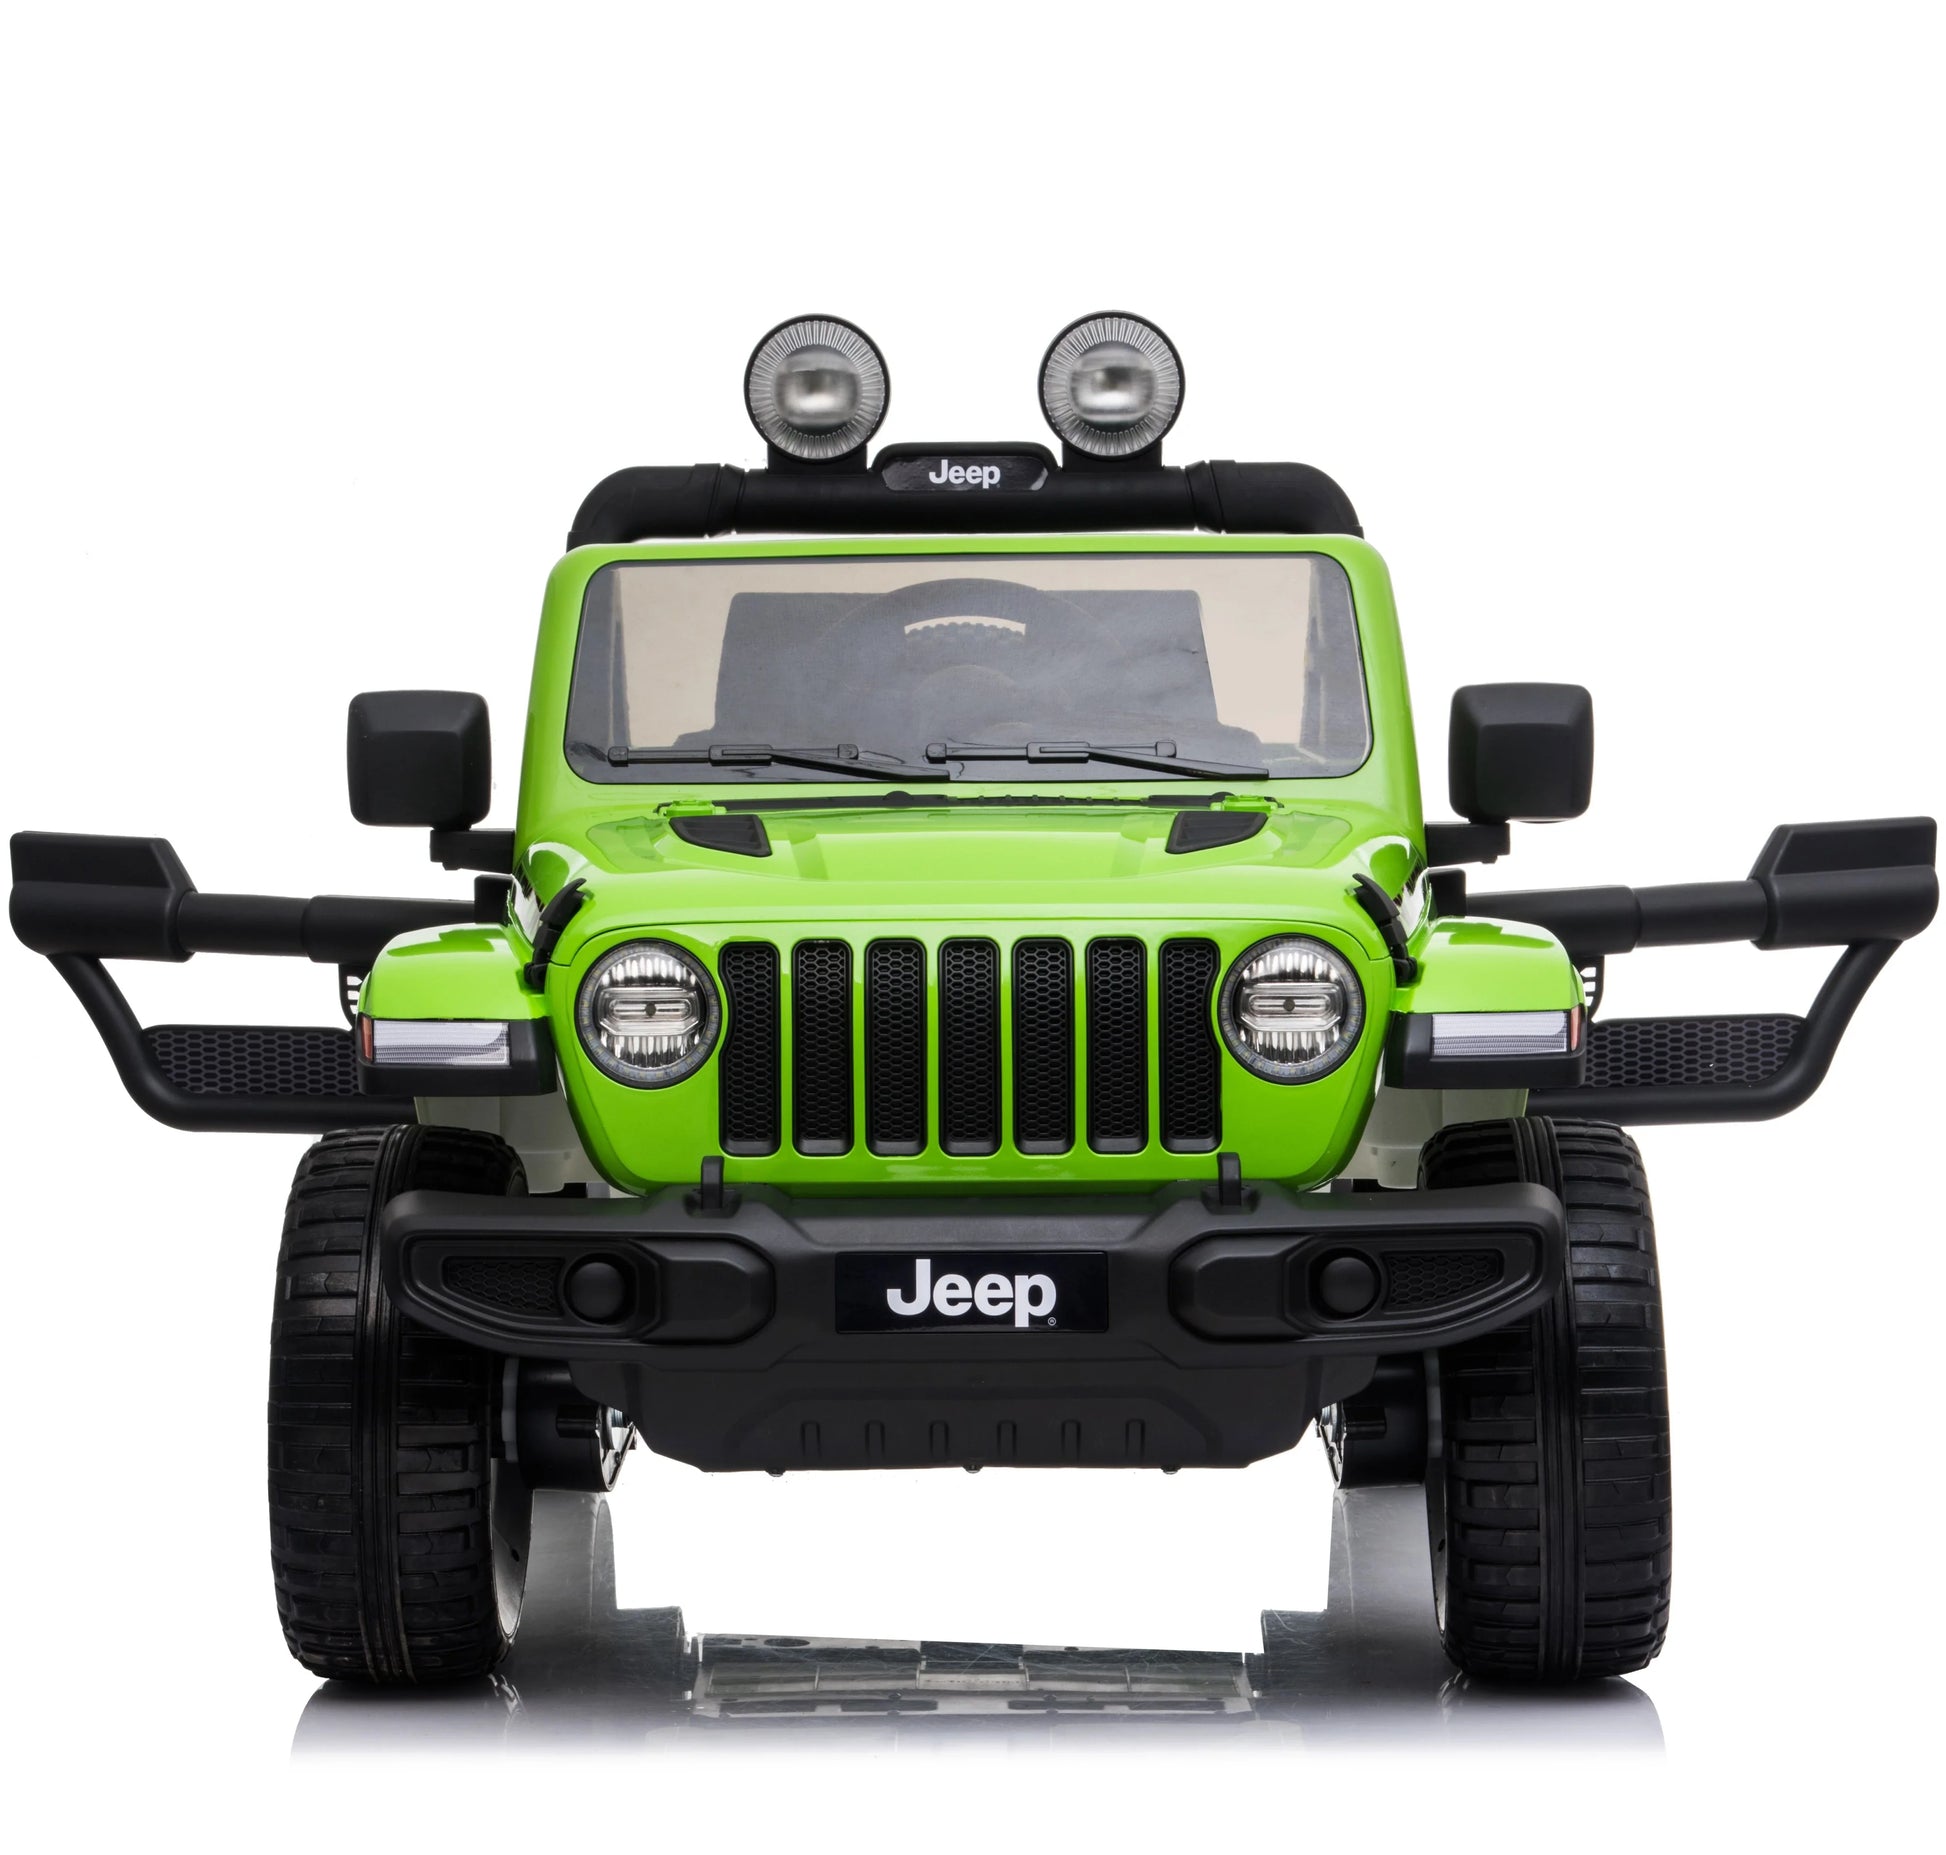 Green Rubicon model - 4WD 12V electric ride-on toy car for children on white background